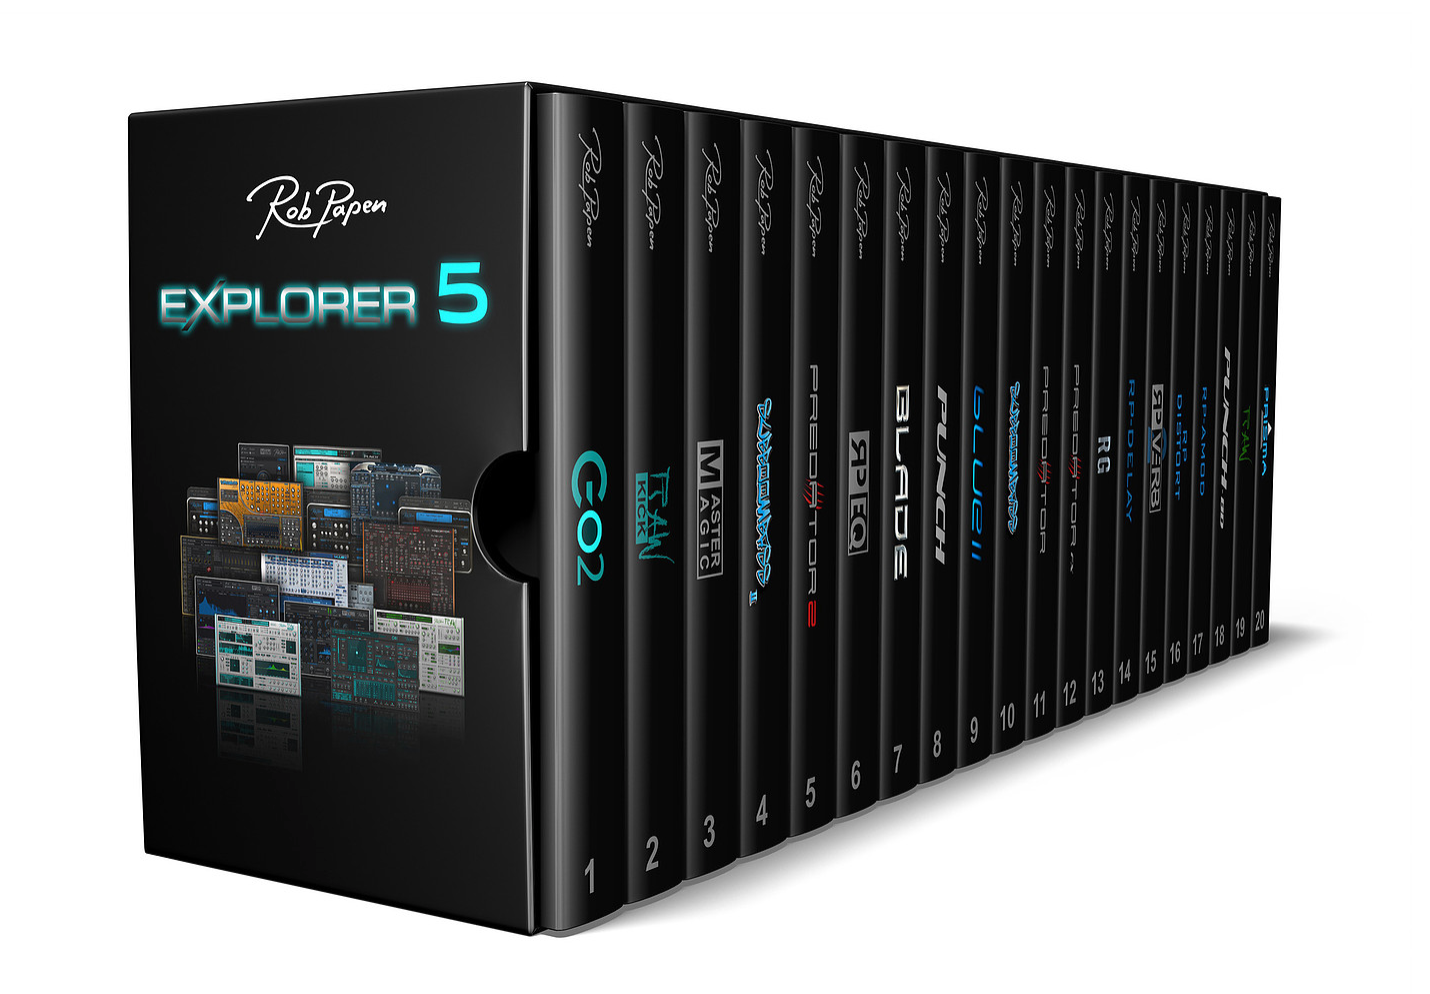 Review: Explorer-5 by Rob Papen